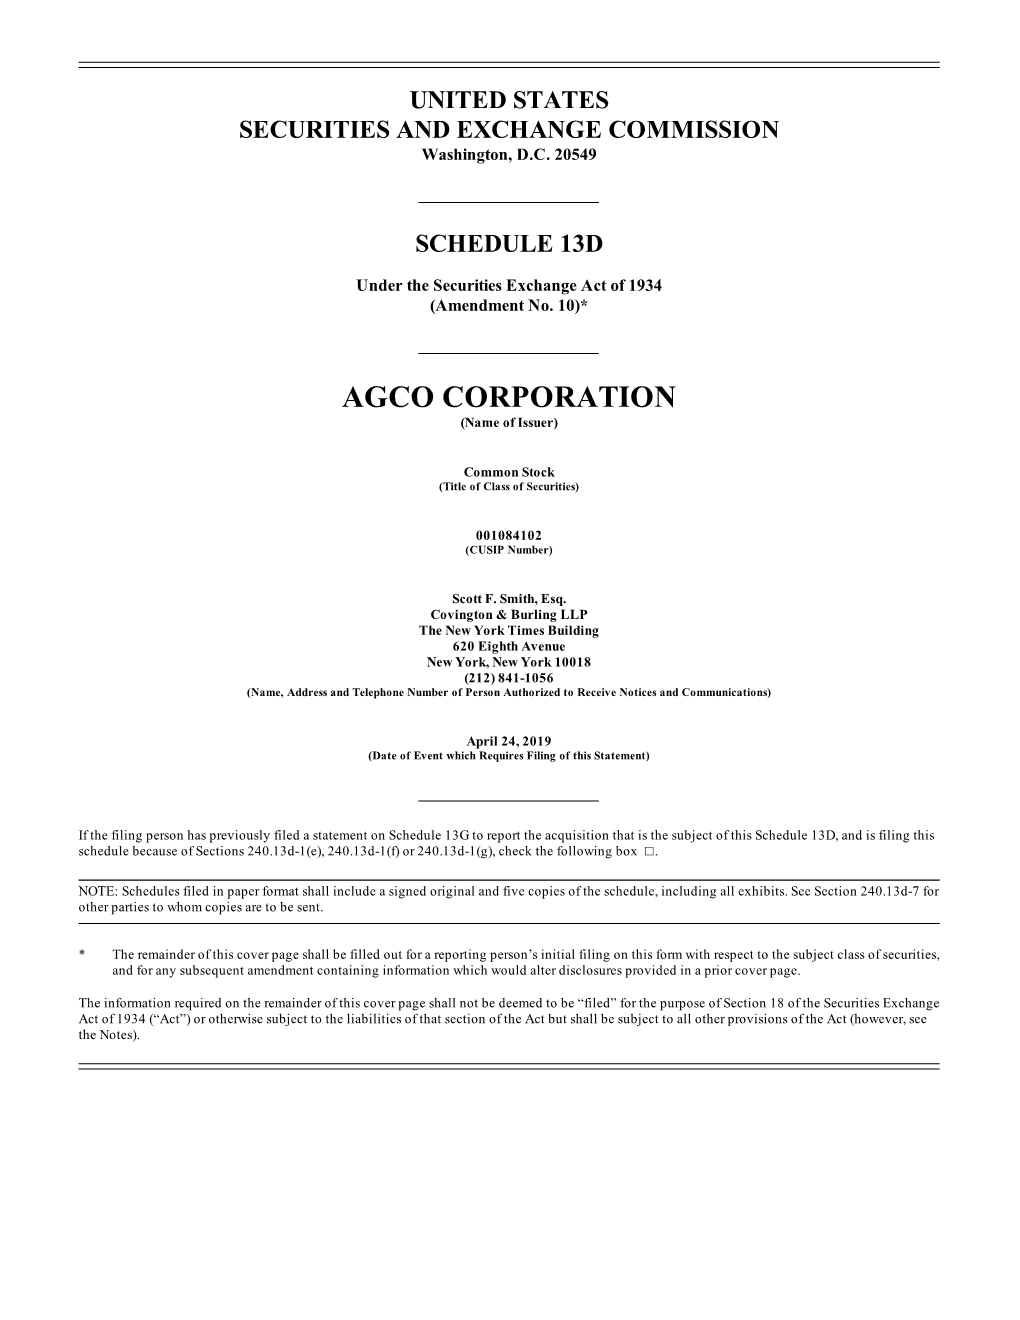 AGCO CORPORATION (Name of Issuer)